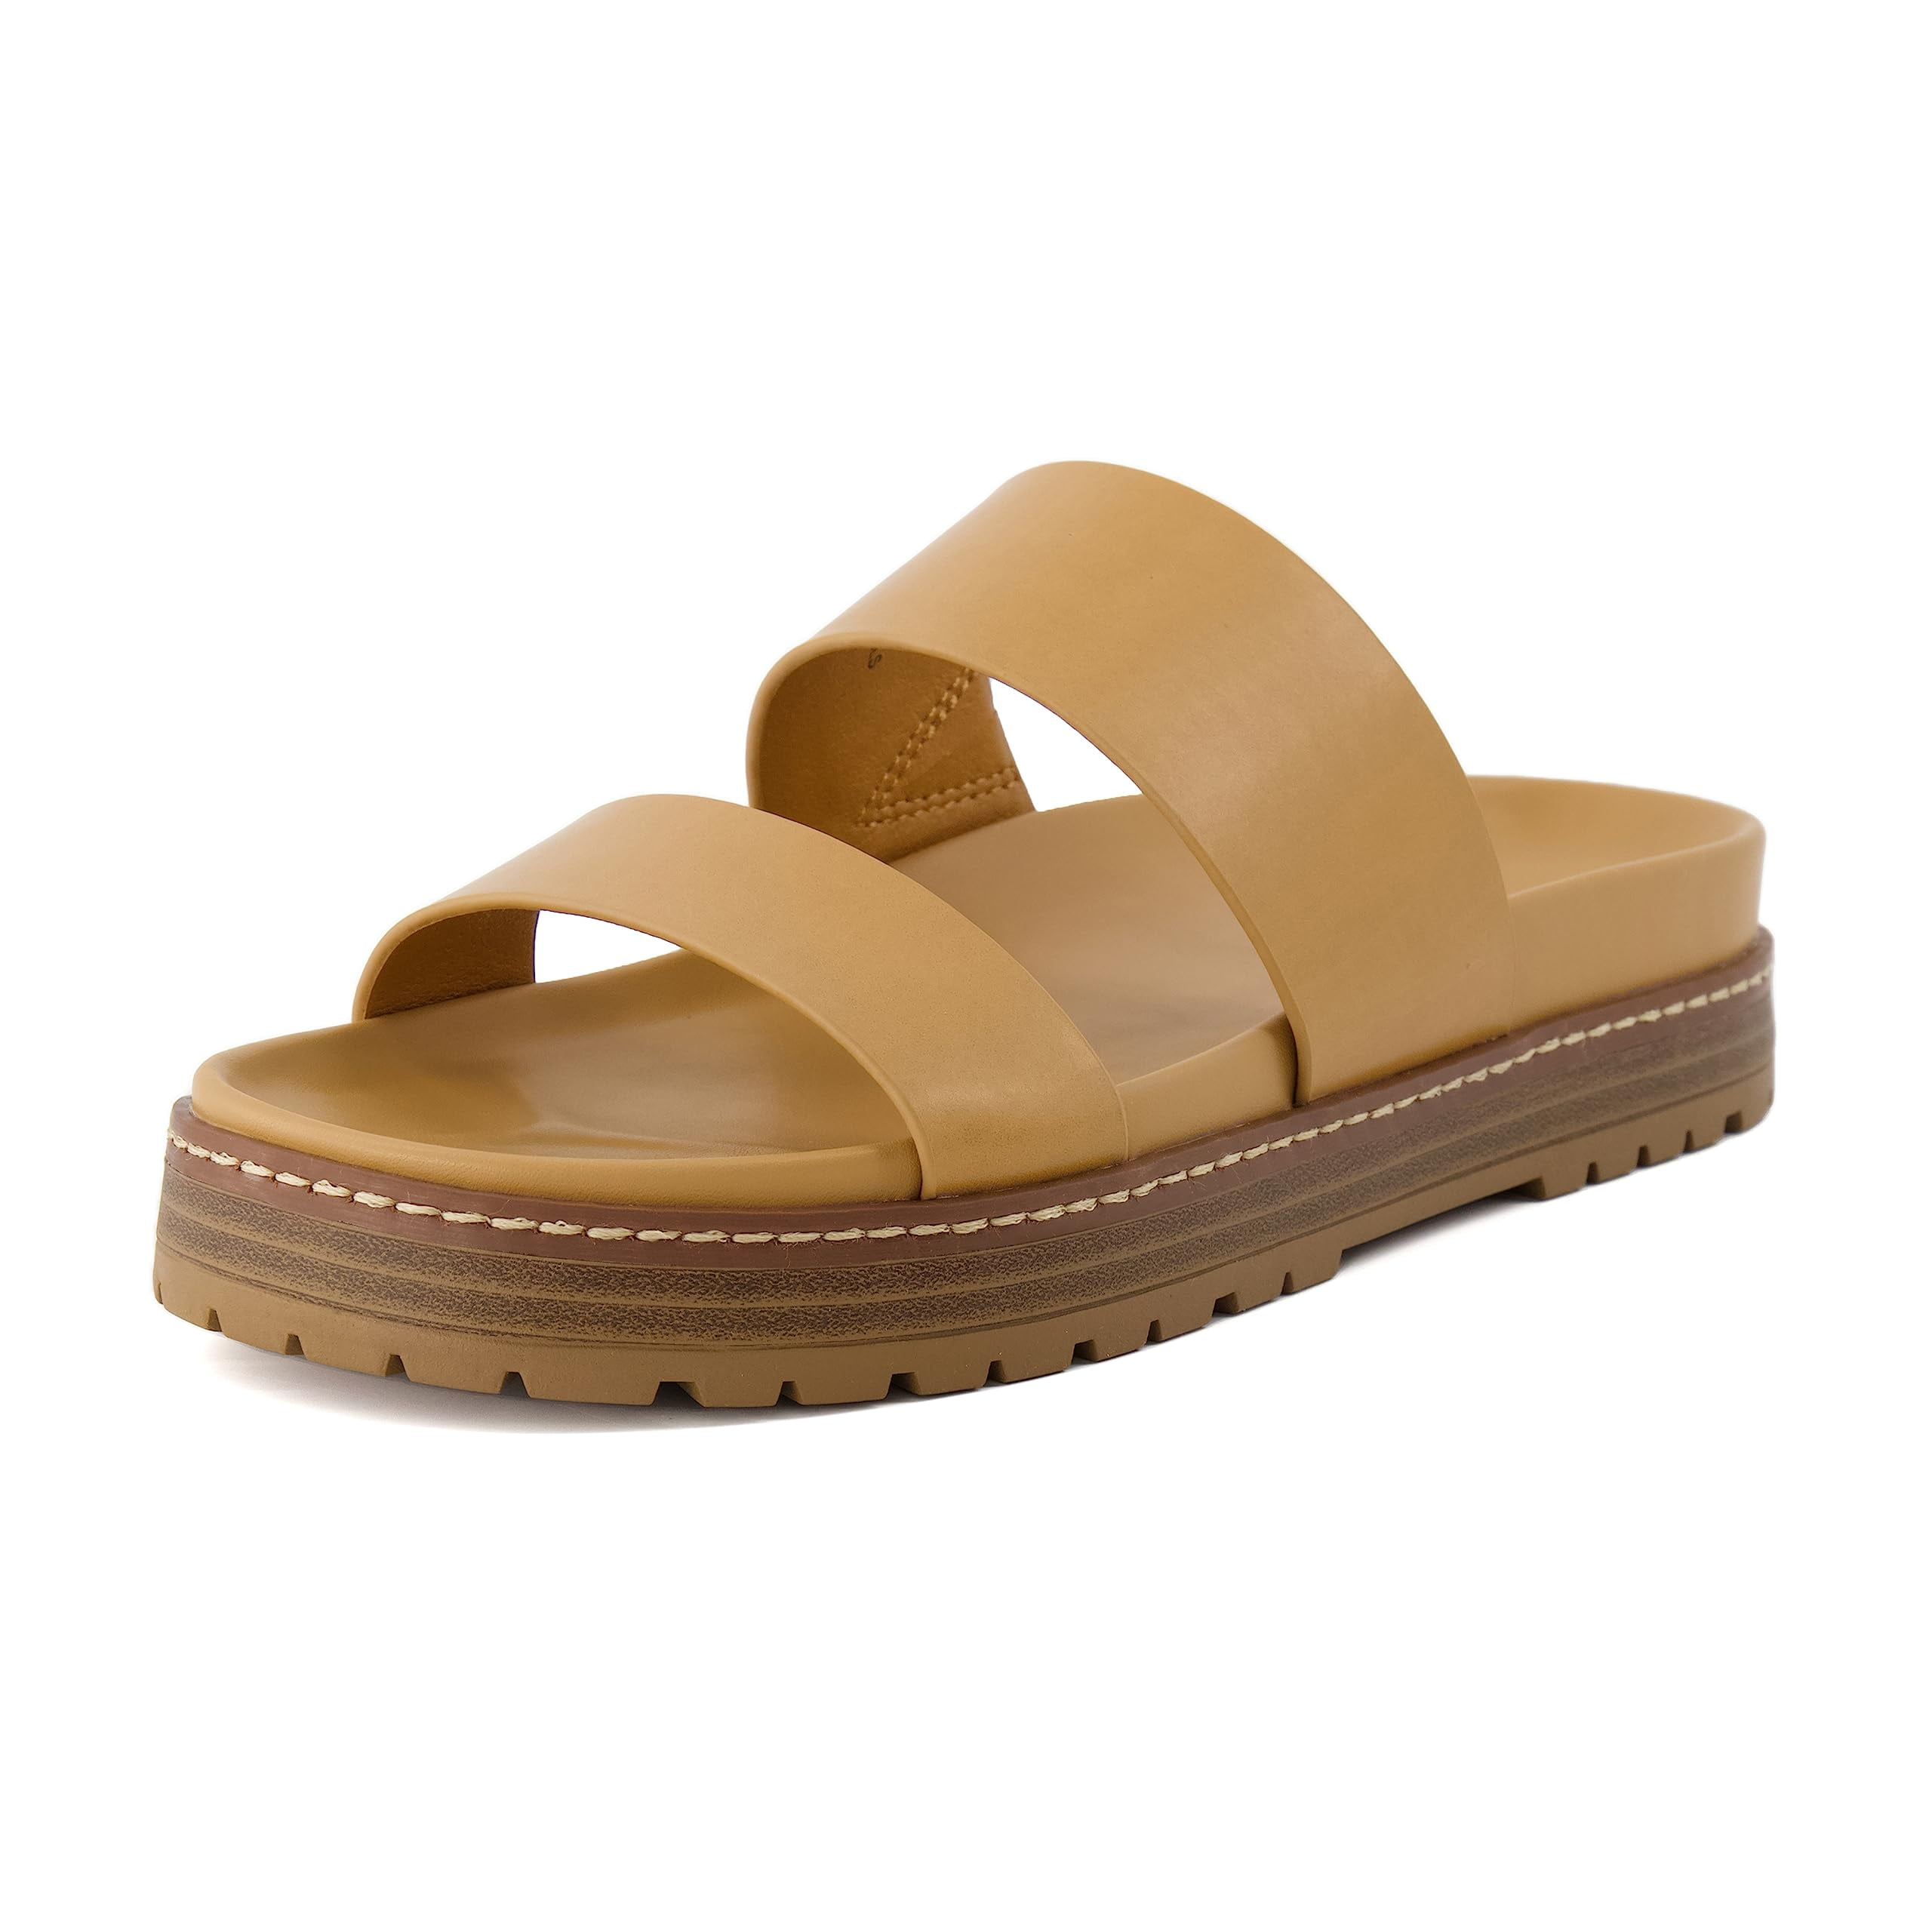 CUSHIONAIRE Women's Noho flatform footbed sandal with +Comfort, Wide ...